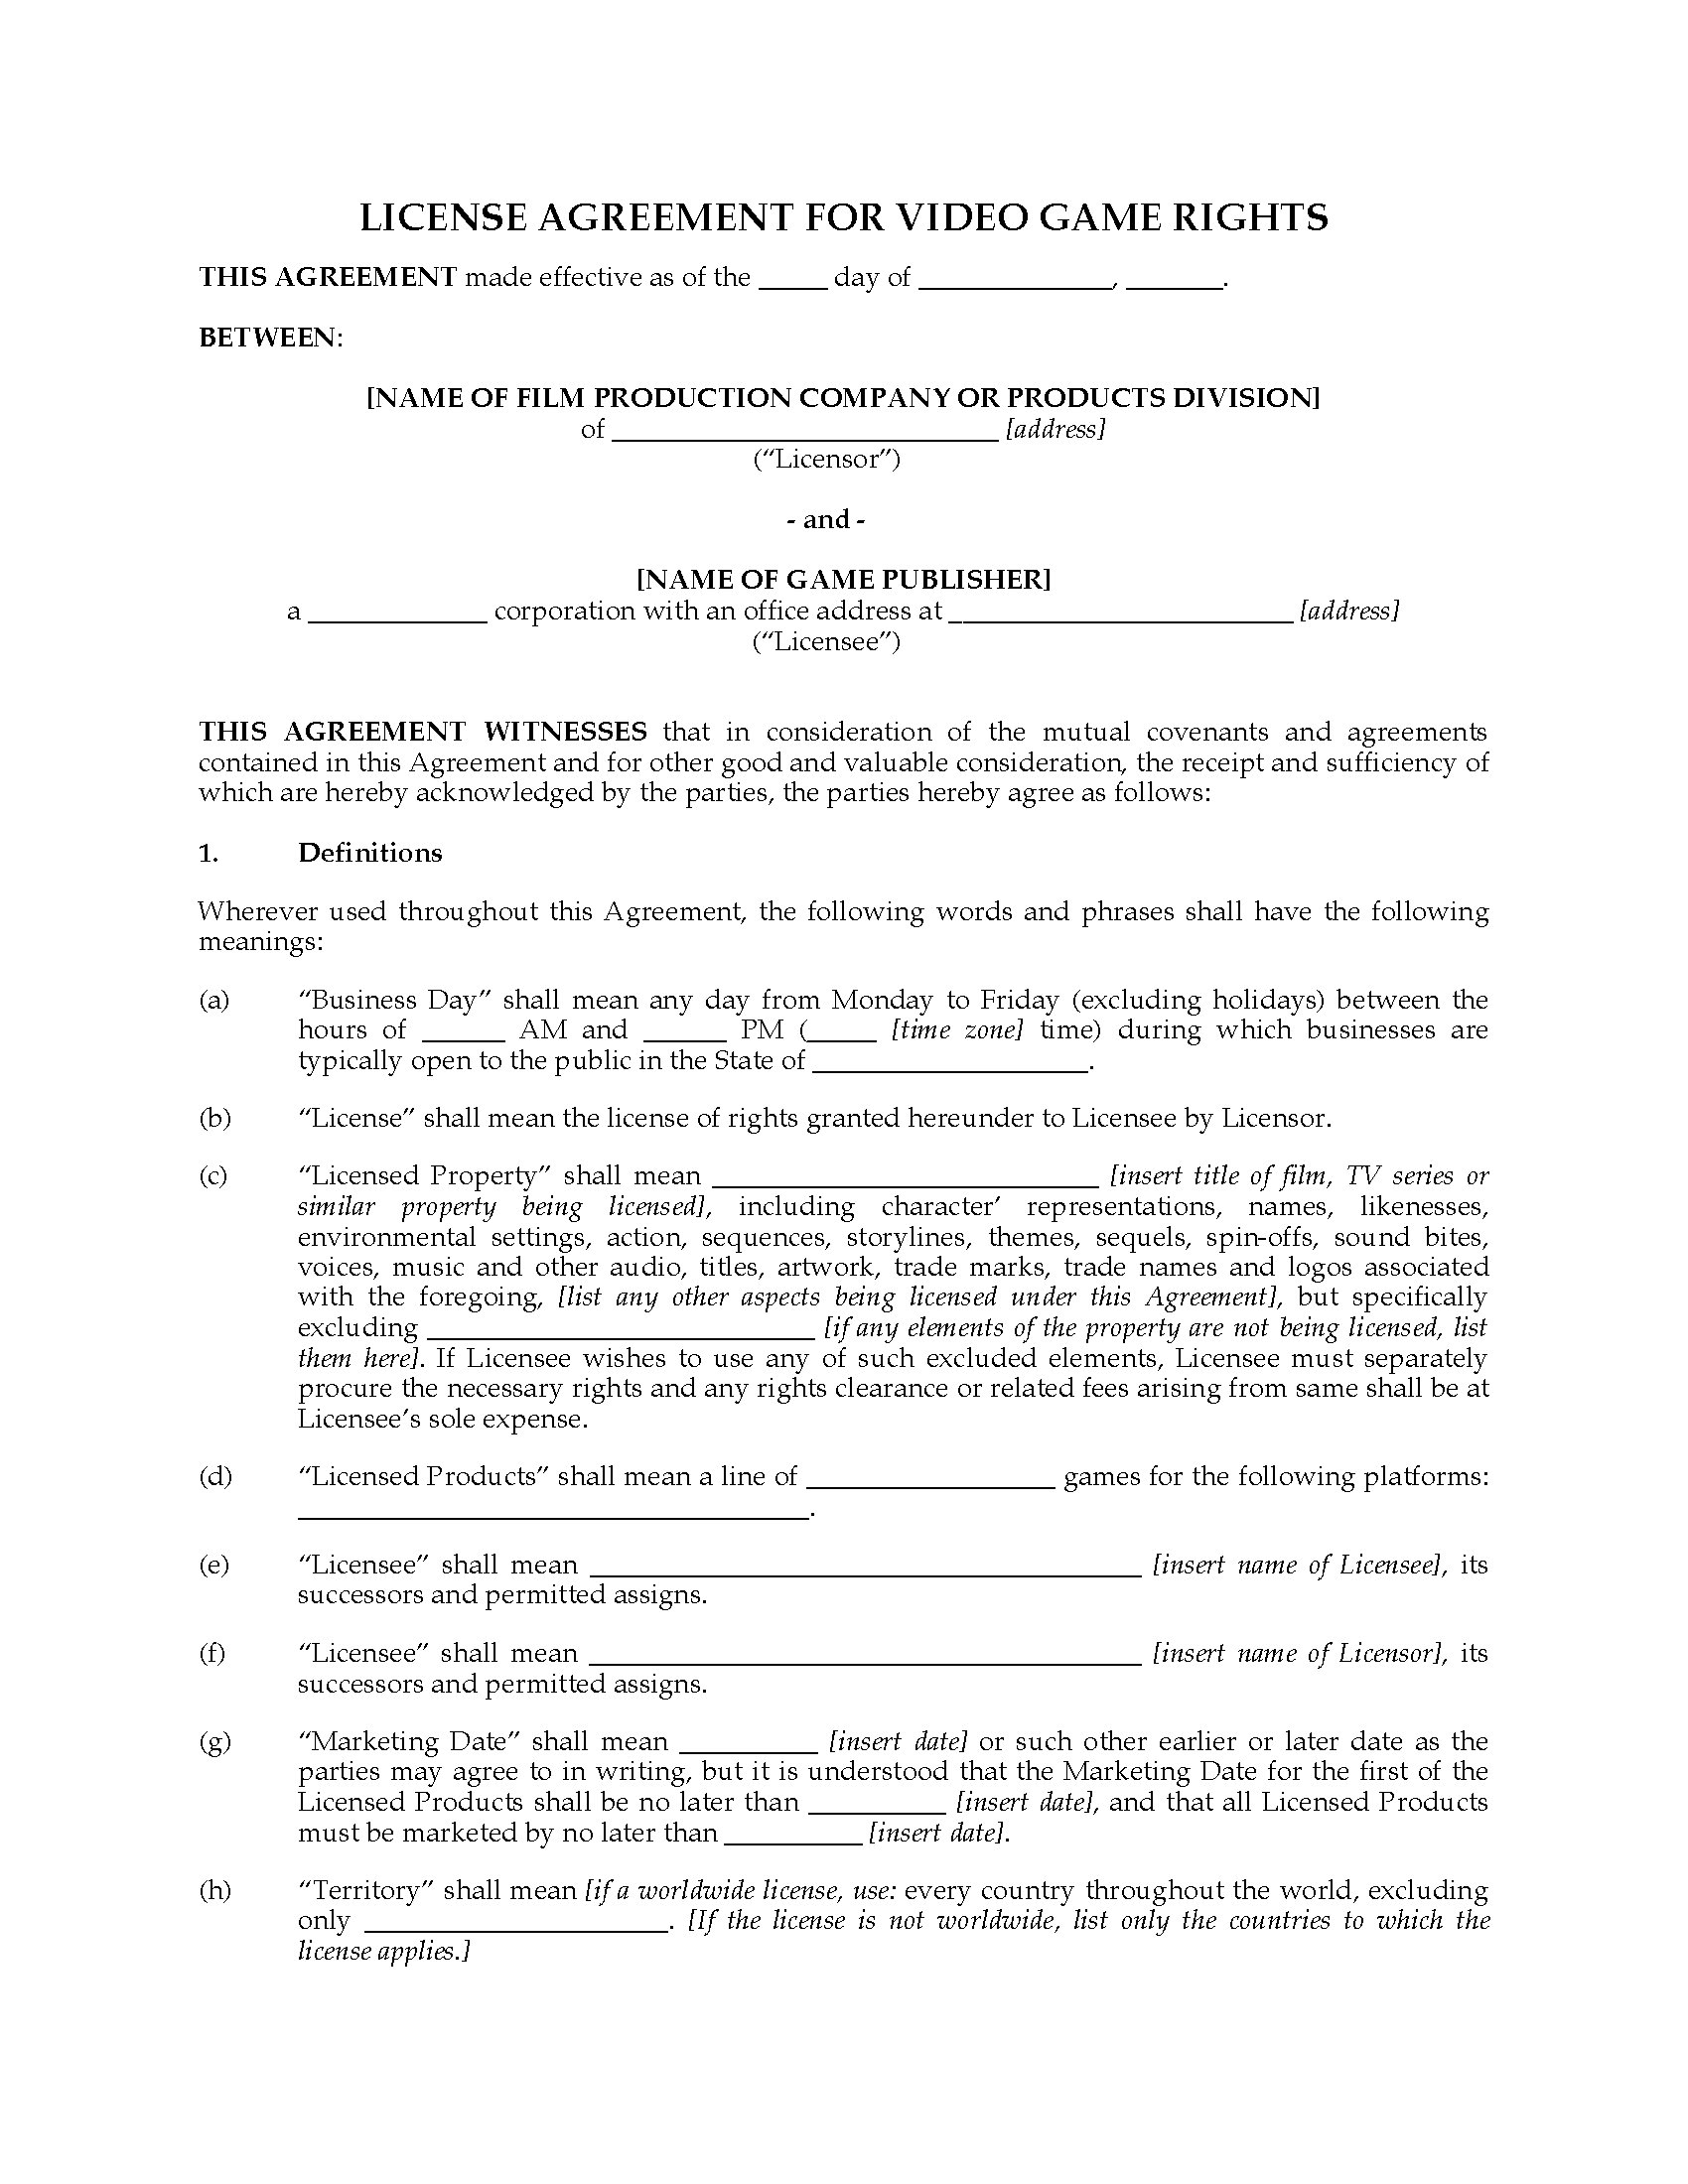 License Agreement for Video Game Rights Legal Forms and Business